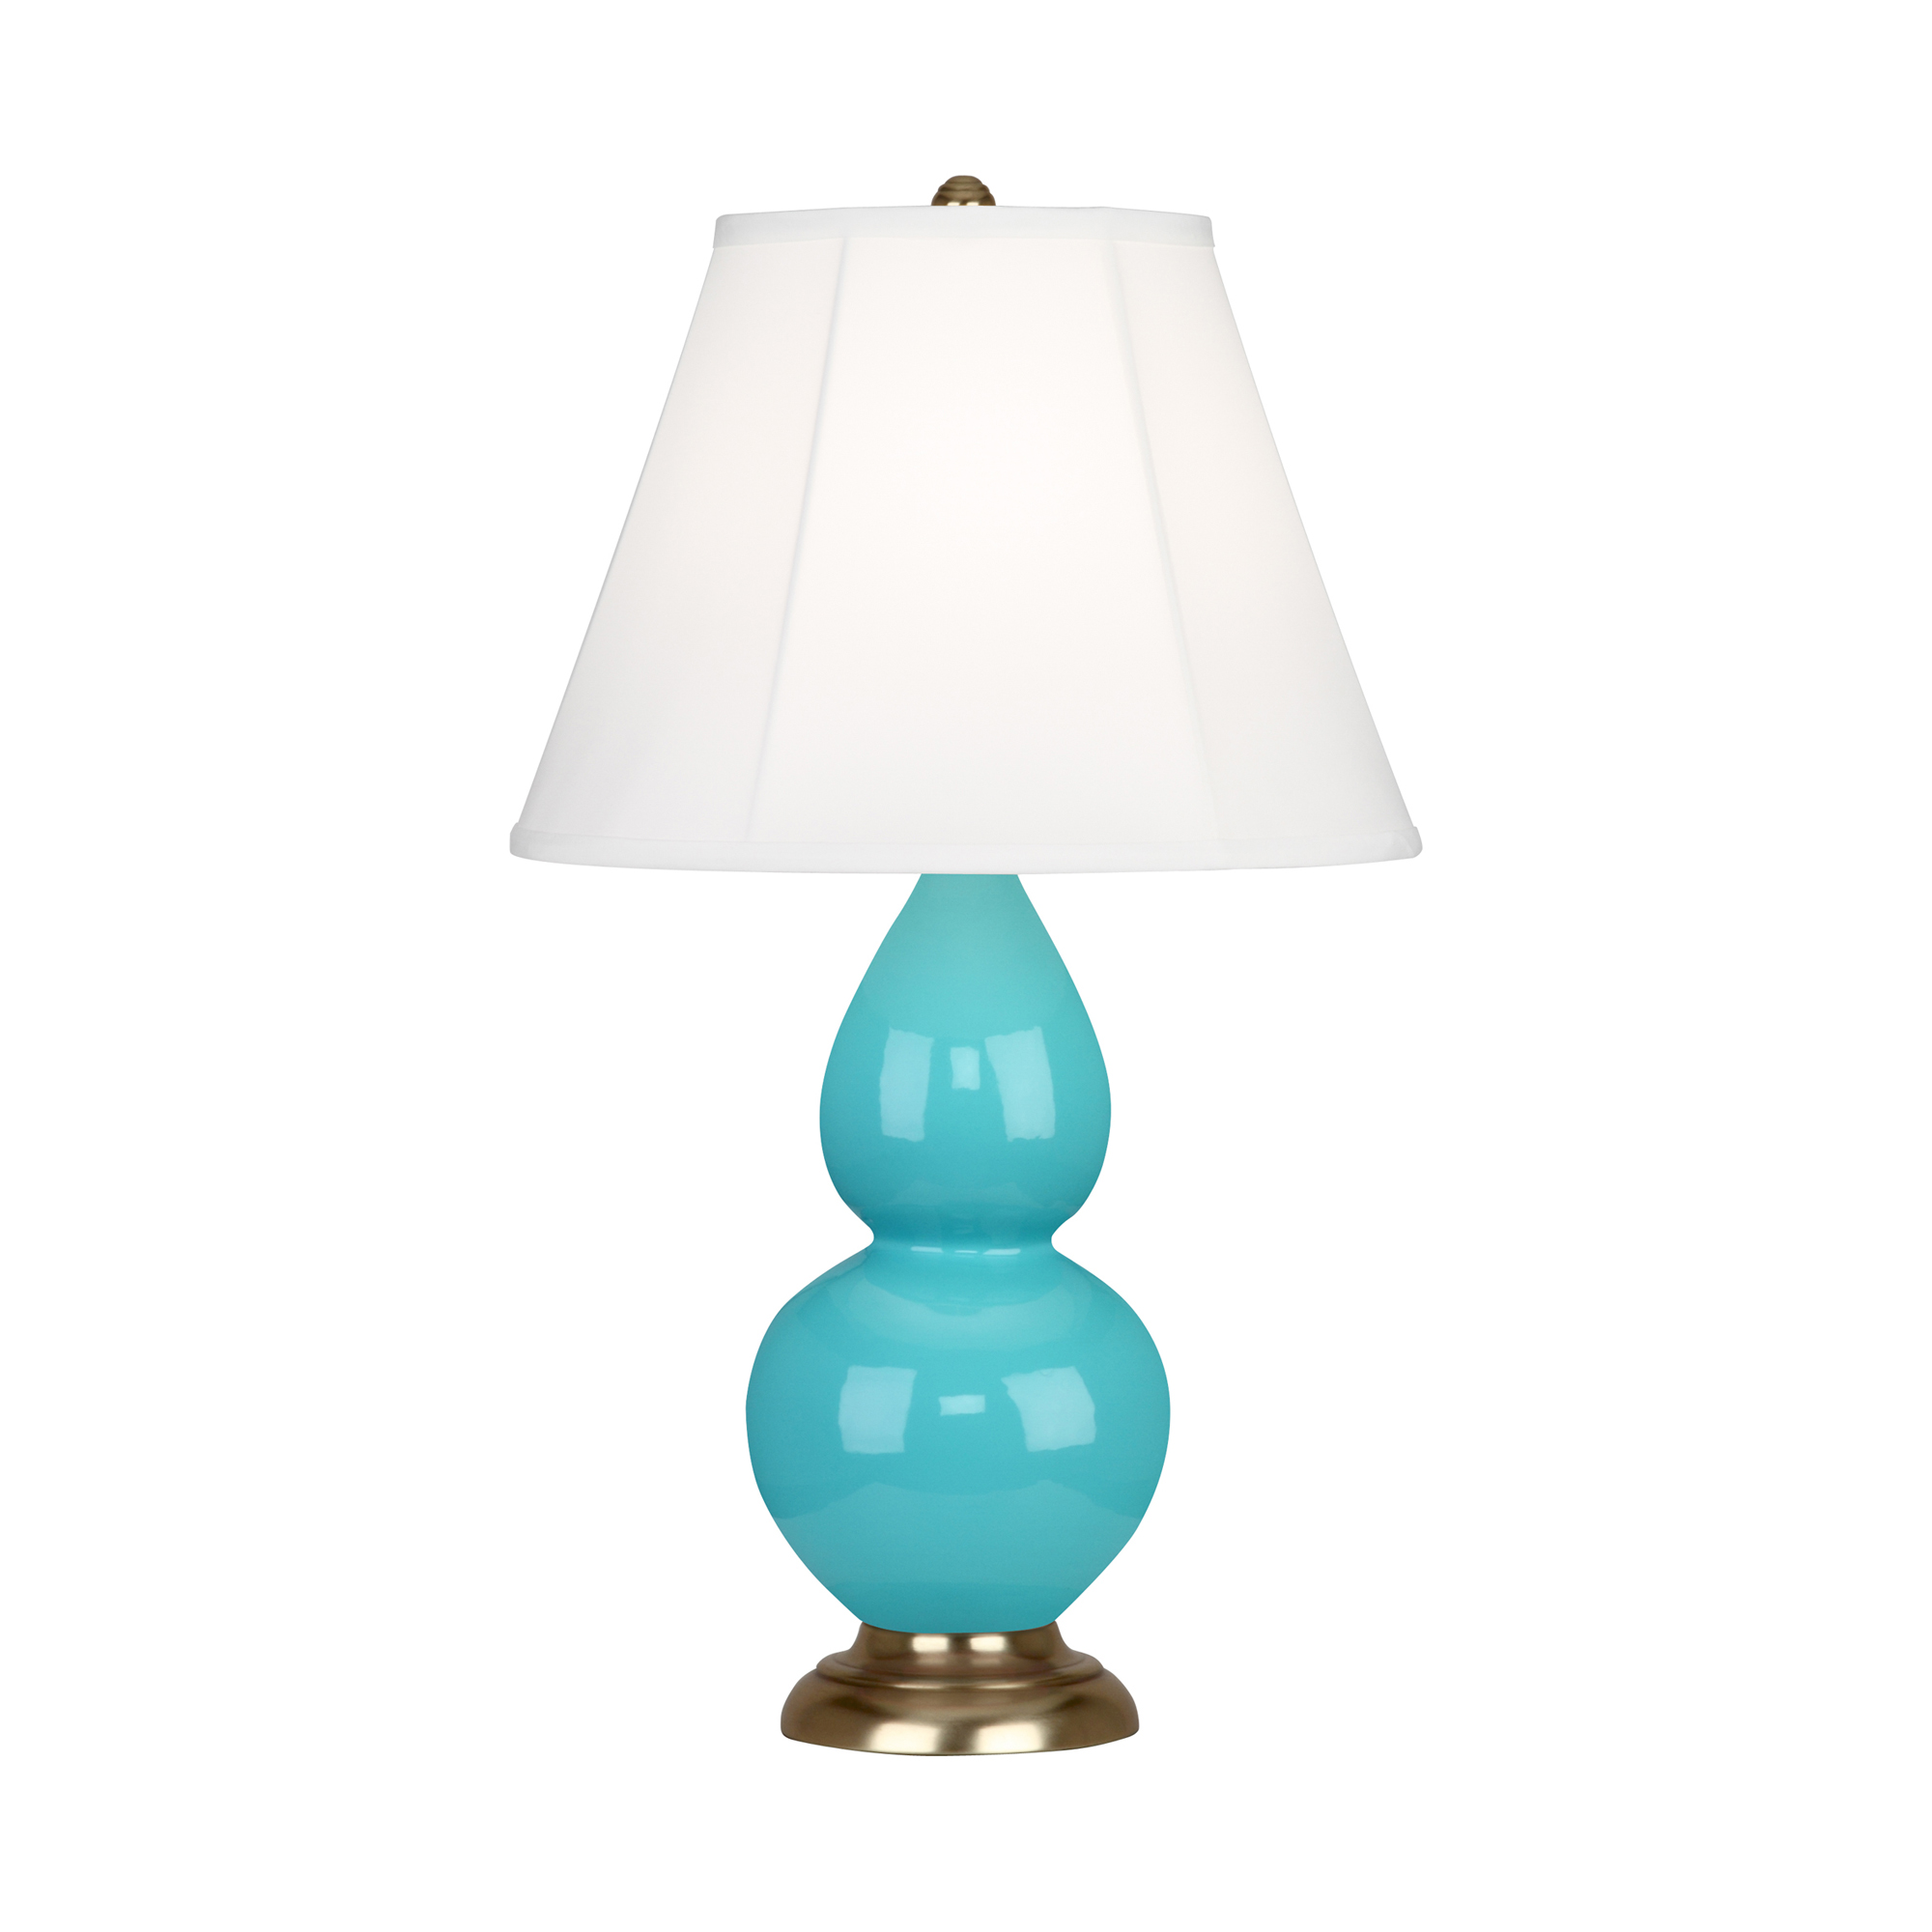 Small Double Gourd Accent Lamp Style #1760